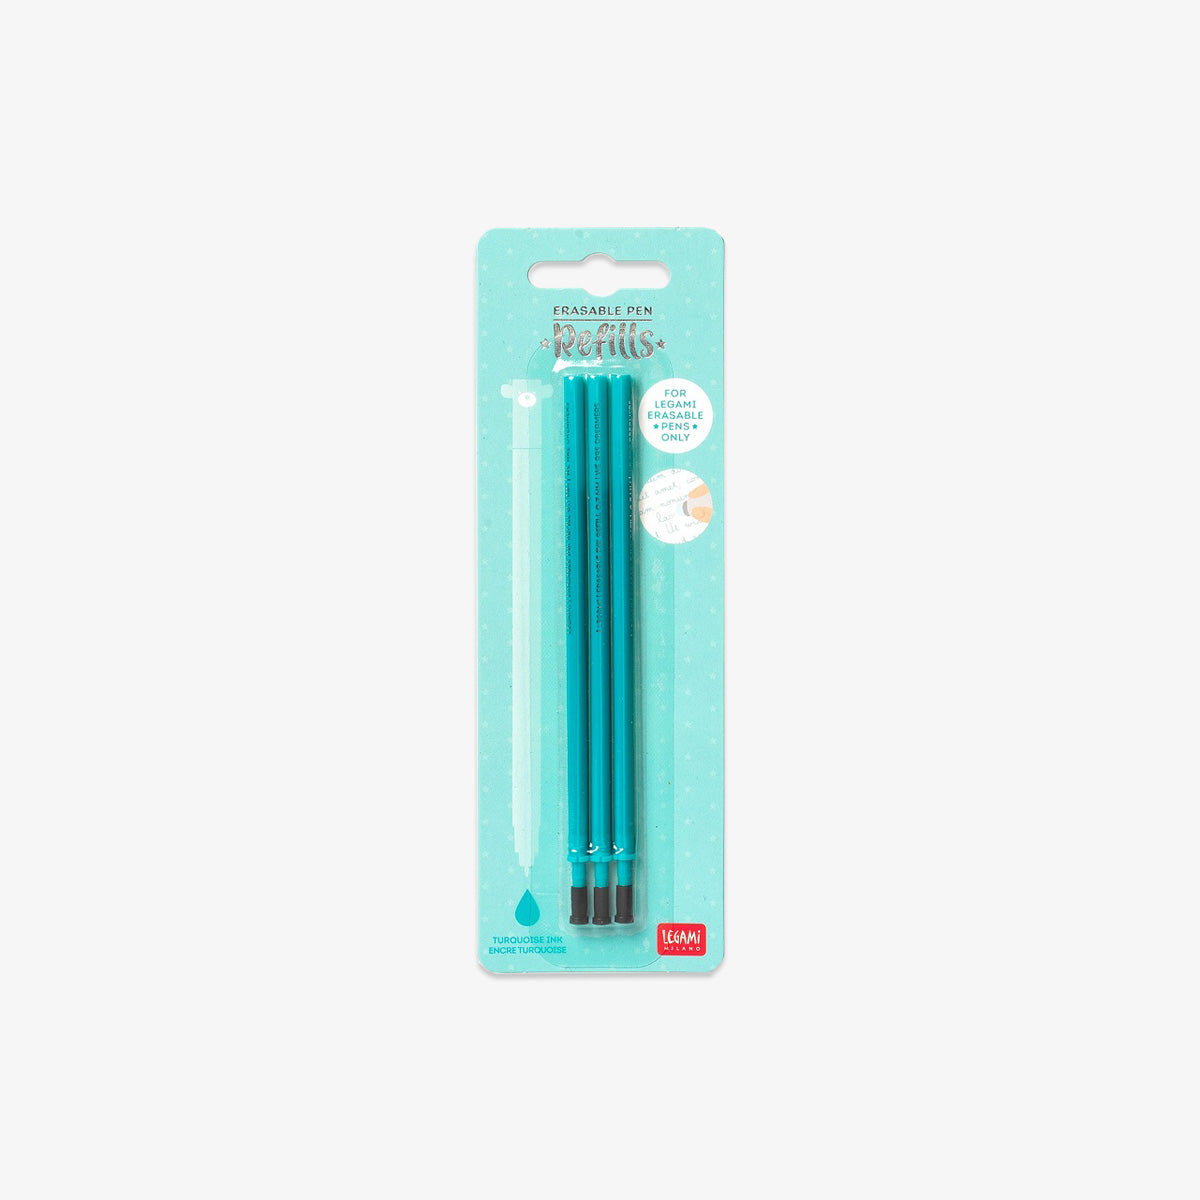 INK REFILLS FOR ERASABLE GEL PENS // TURQUOISE